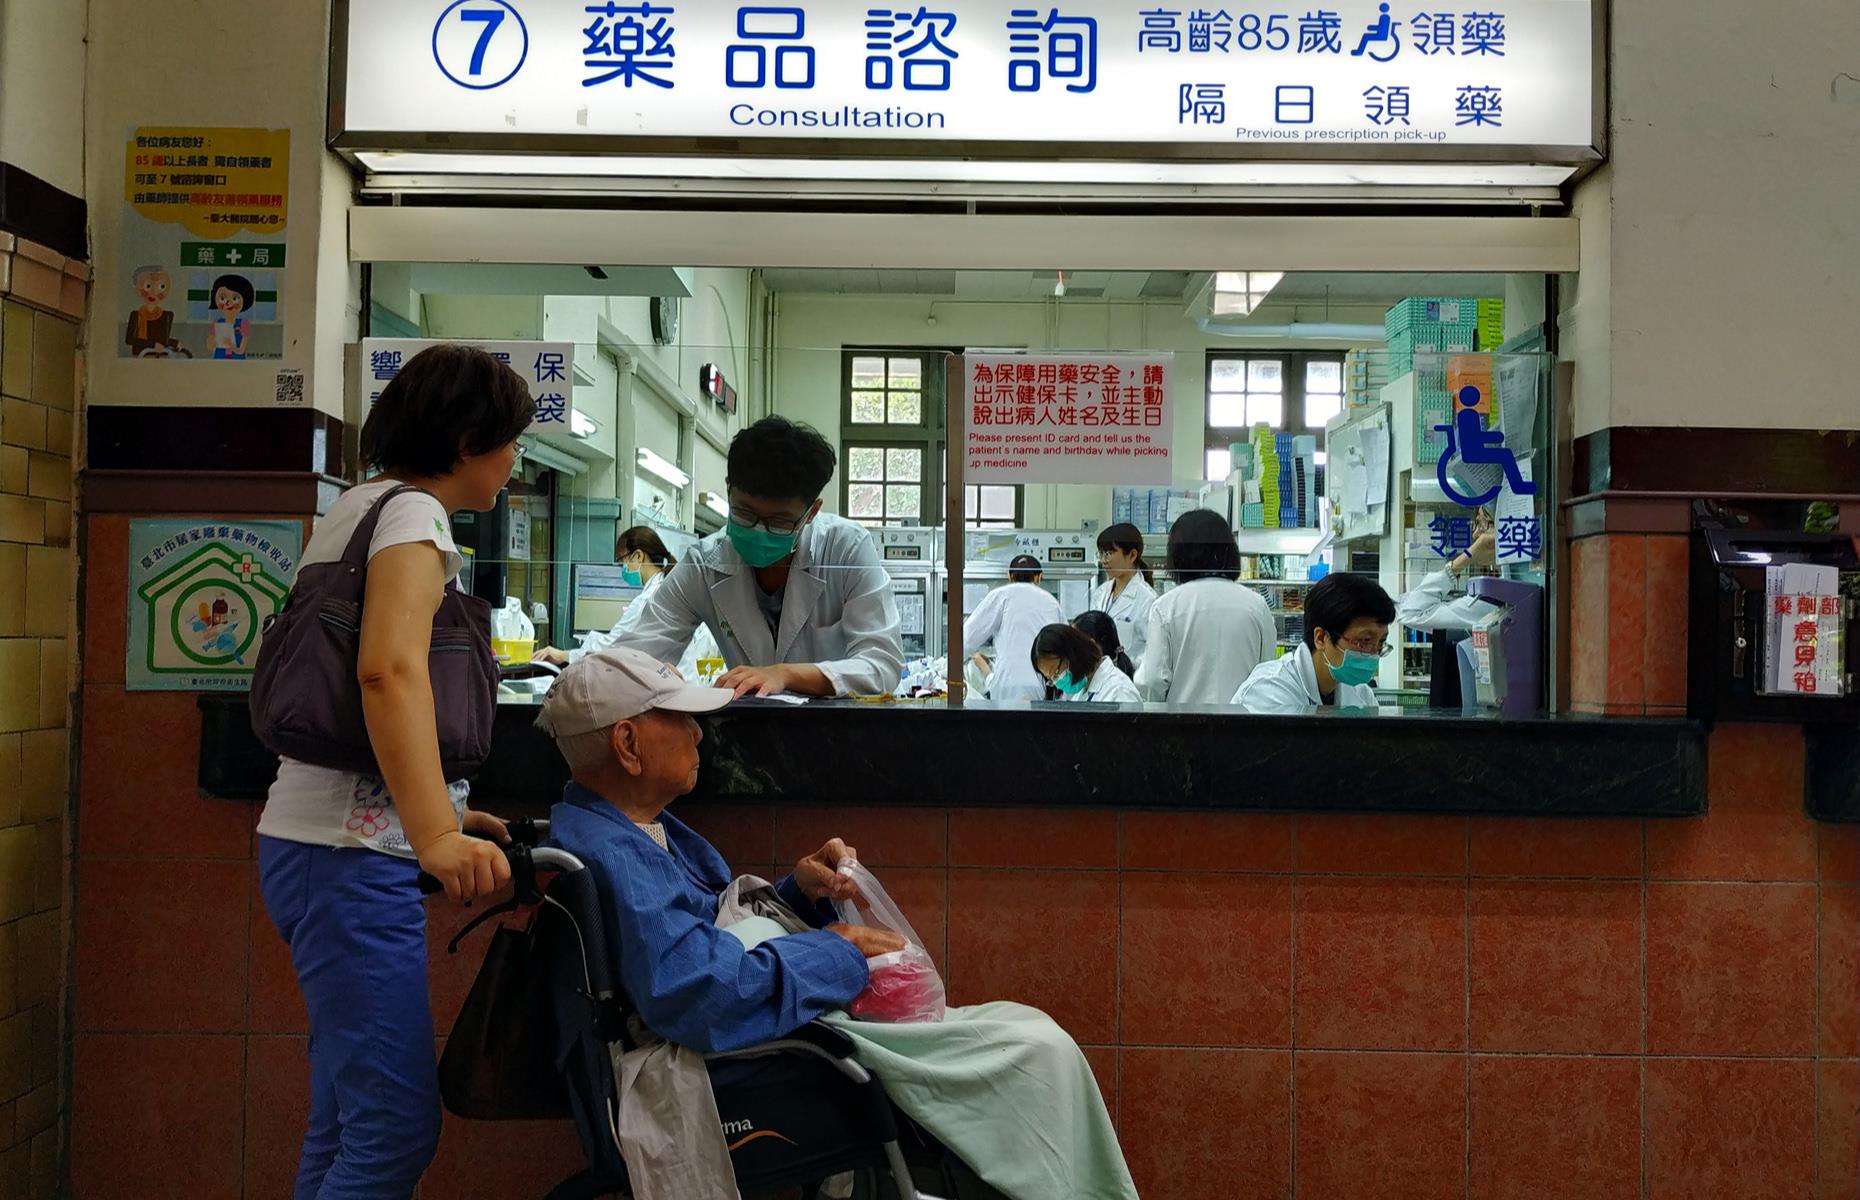 Taiwan's epidemic-proofing will become the norm